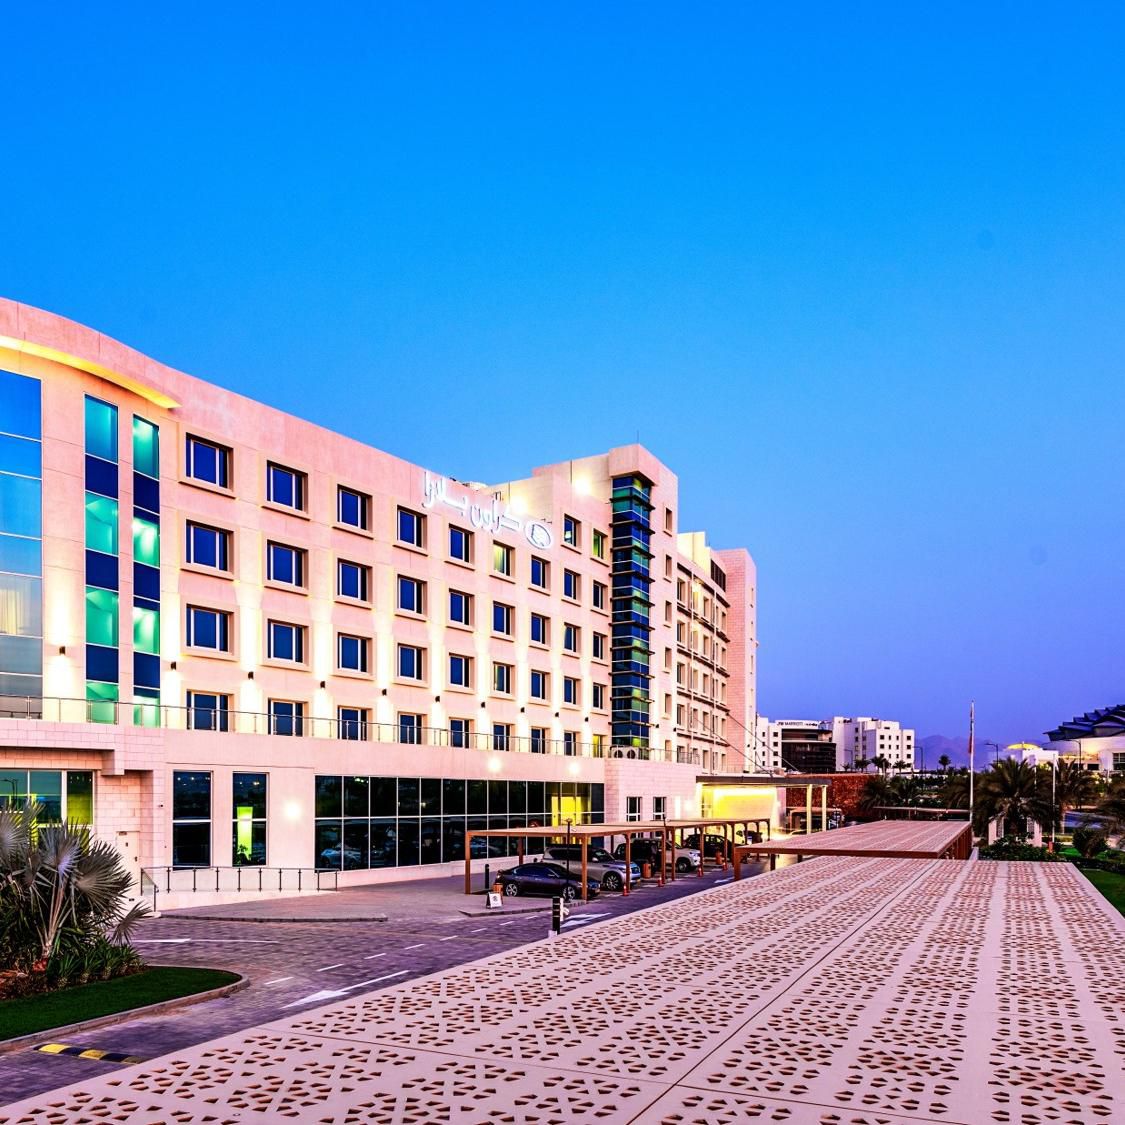 Located within a walking distance from Oman Convention Centre